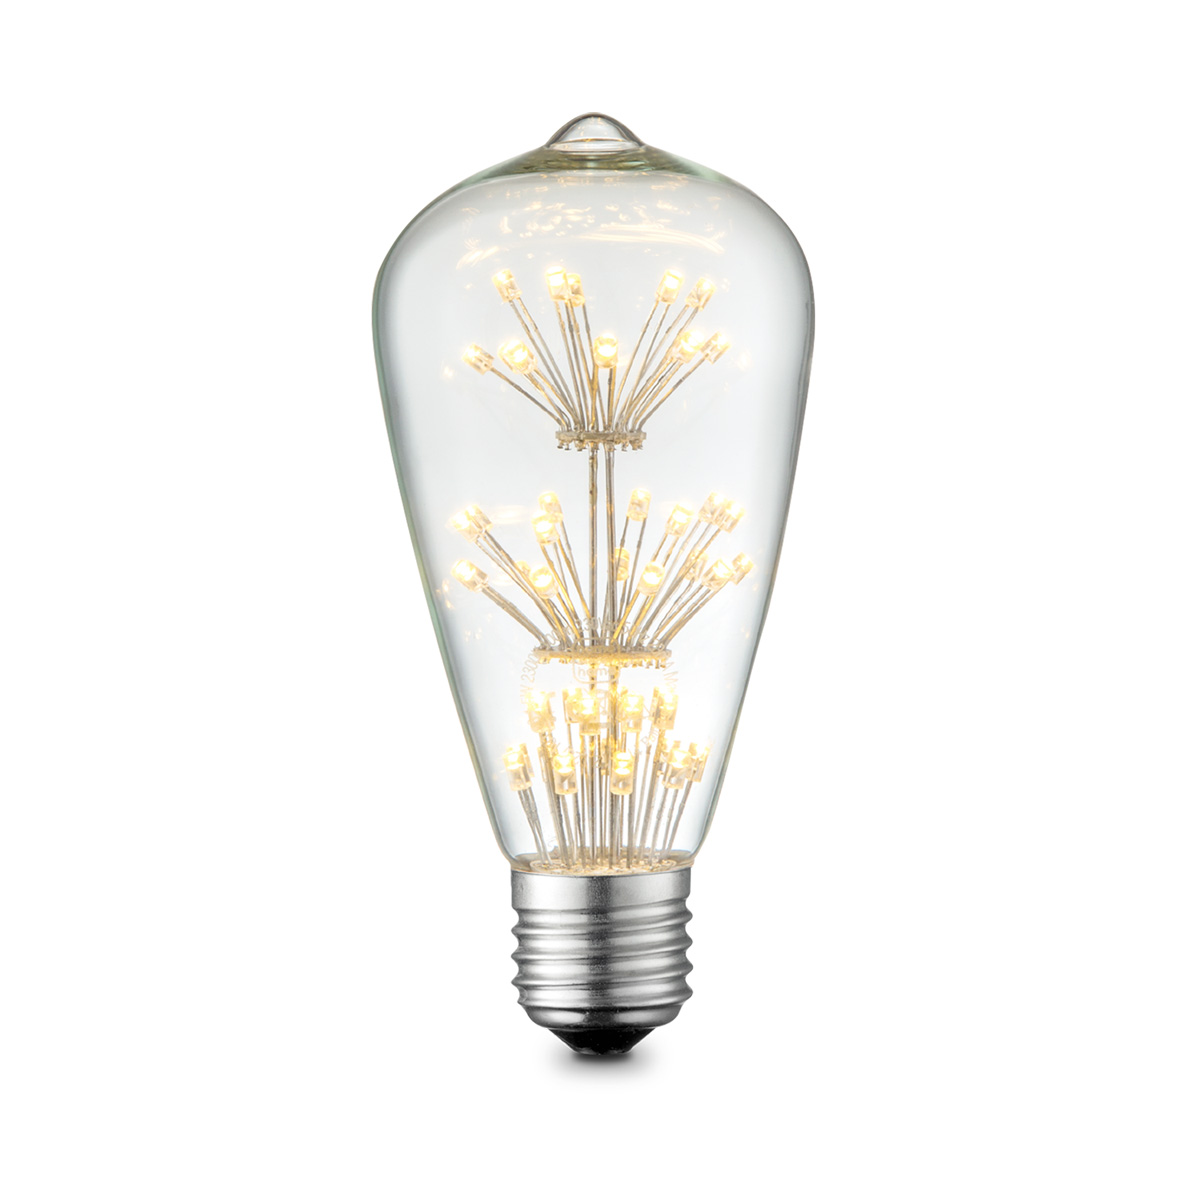 Tangla lighting - TLB-8083-05CL - LED Light Bulb Crystal filament - ST64 1.5W clear - non dimmable - E27